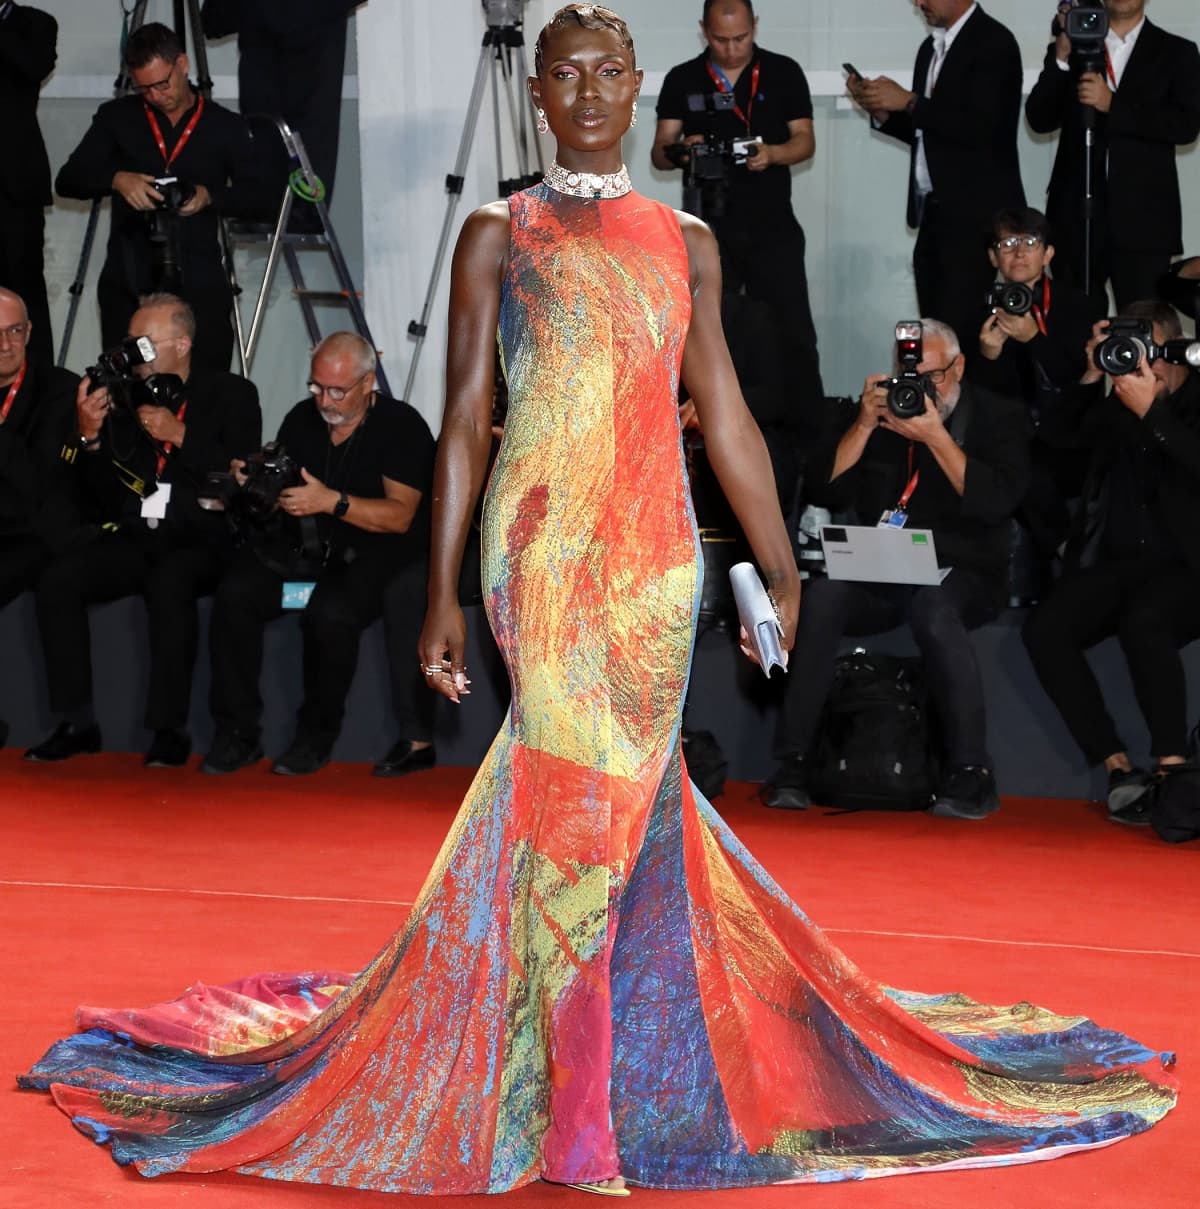 Jodie Turner-Smith looking stunning in a Christopher John Rogers multicolored gown with Jimmy Choo heels